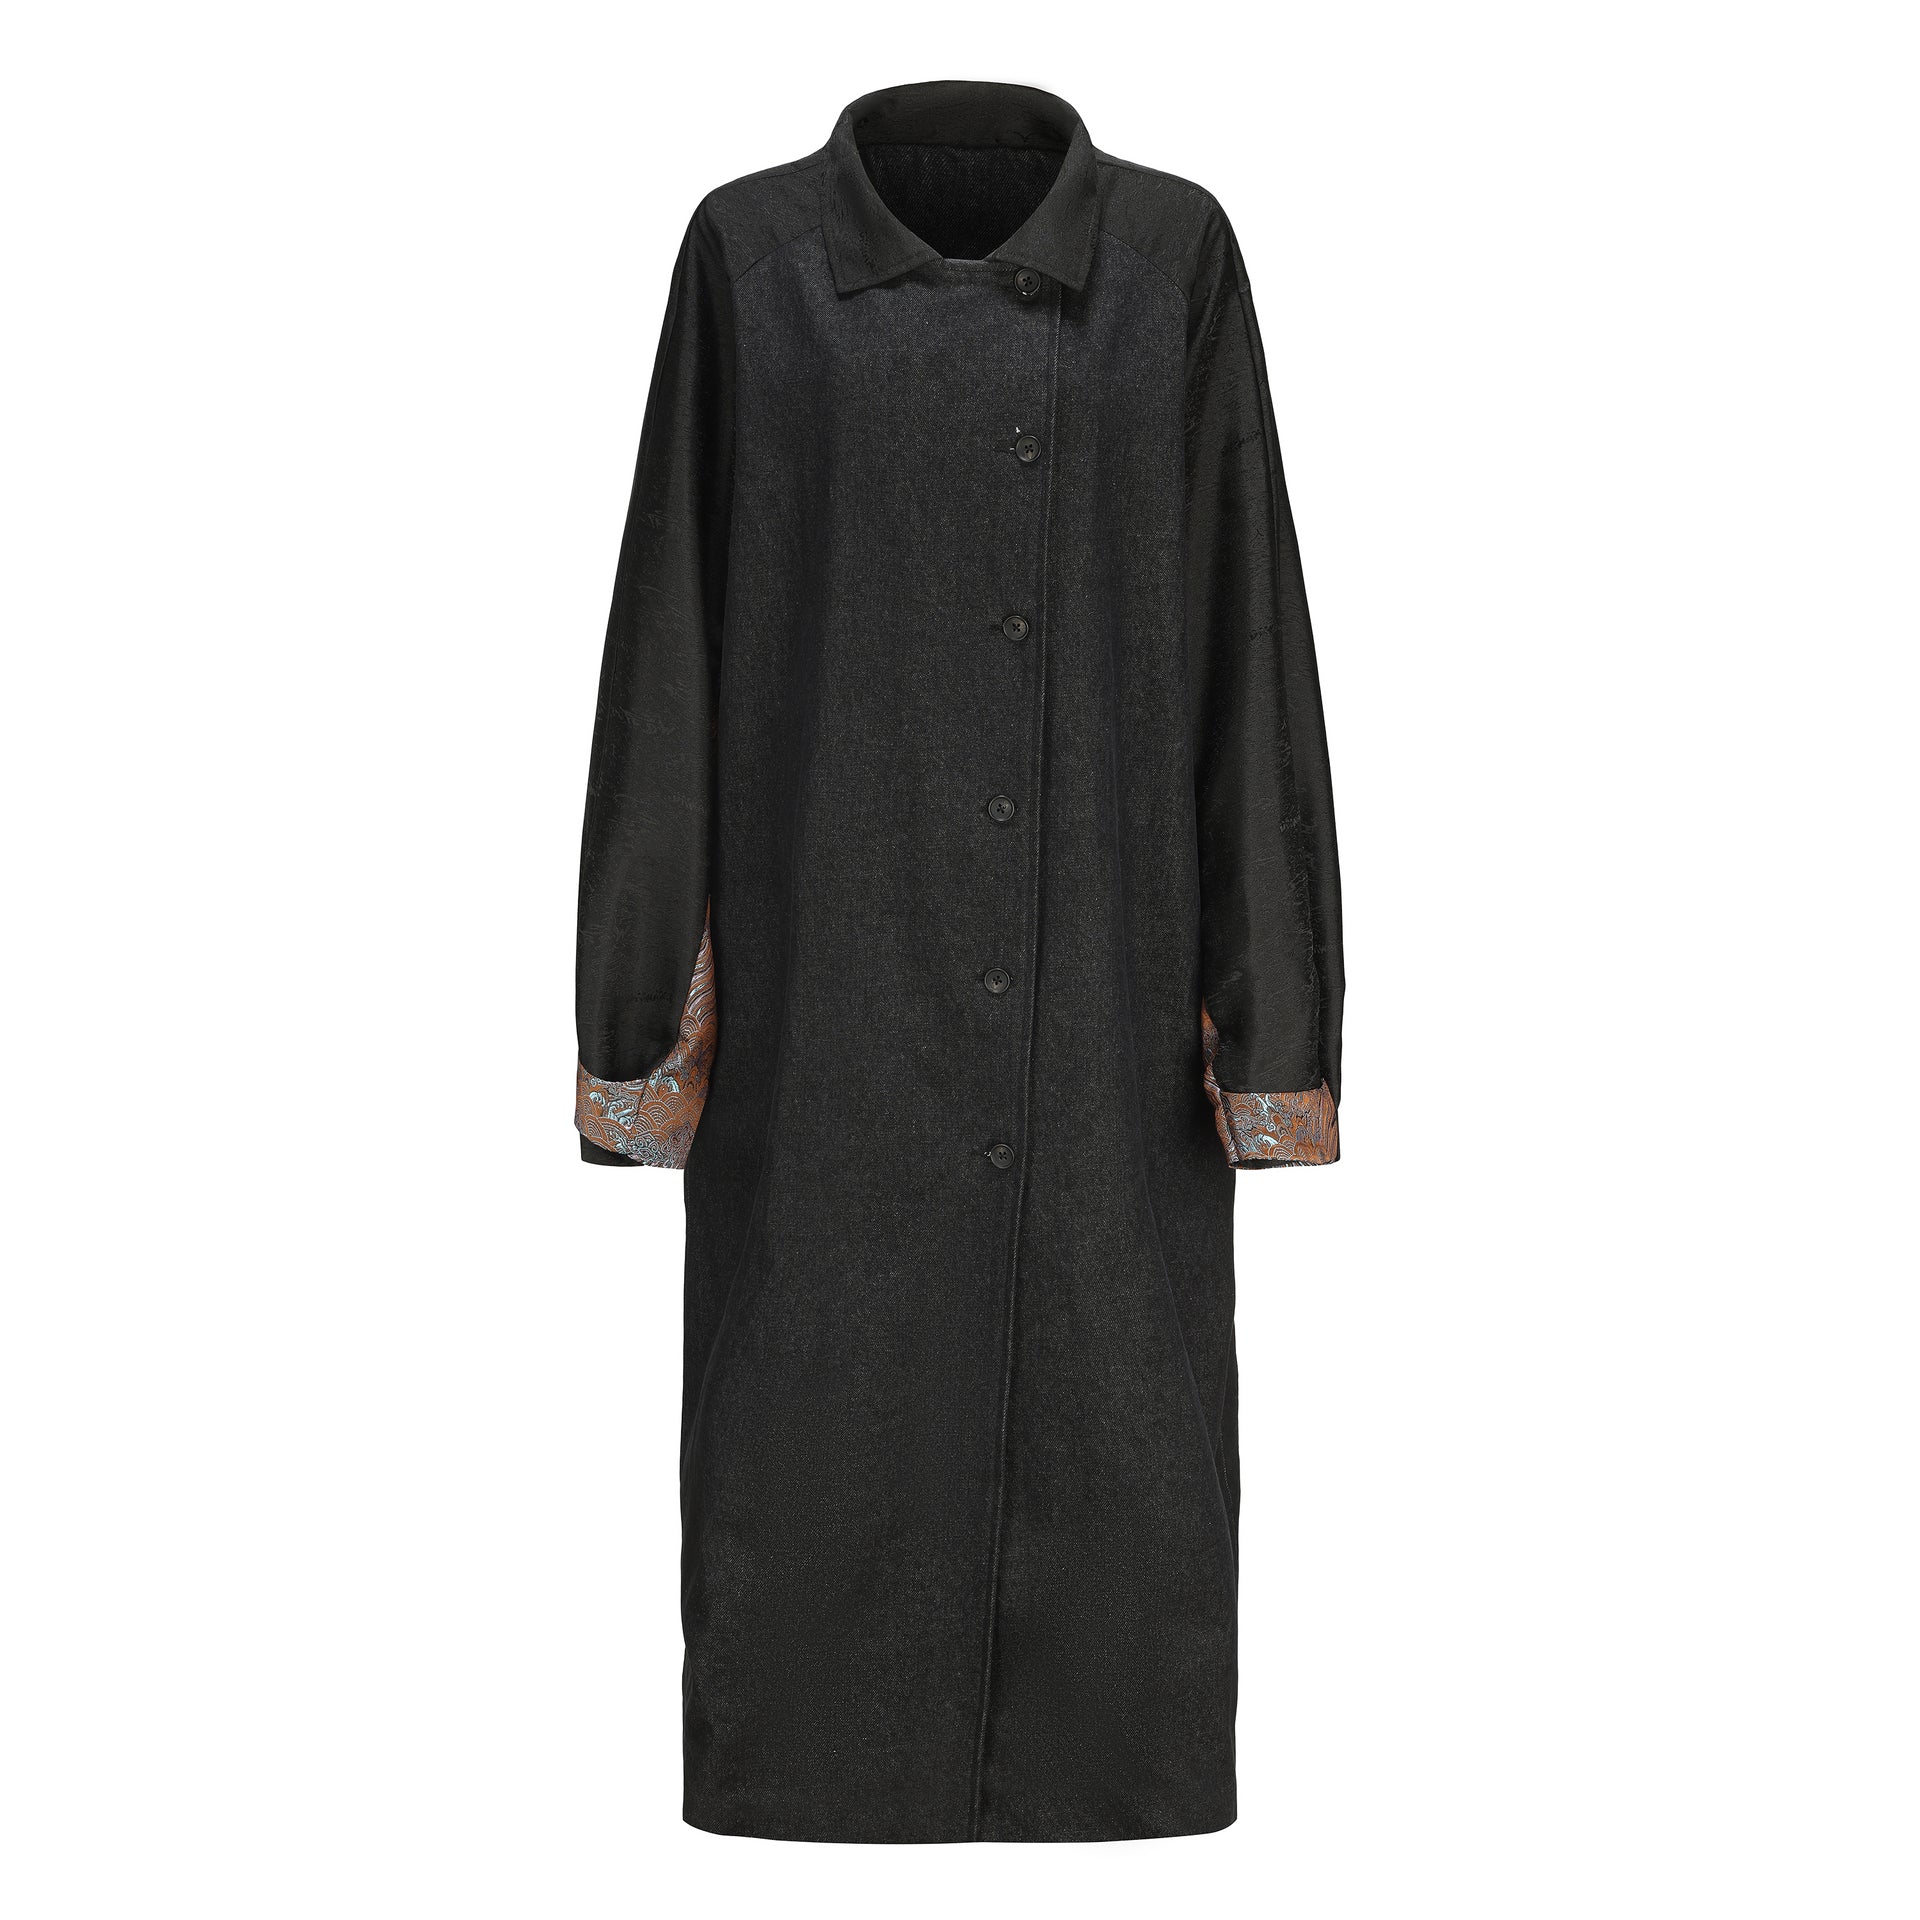 Li Patch Collar Button Oversized Coat, Drop Shoulder Oversized, Contrast Black DAWANG, Brown Brocade Patch on Both Sleeves, Side Button, front